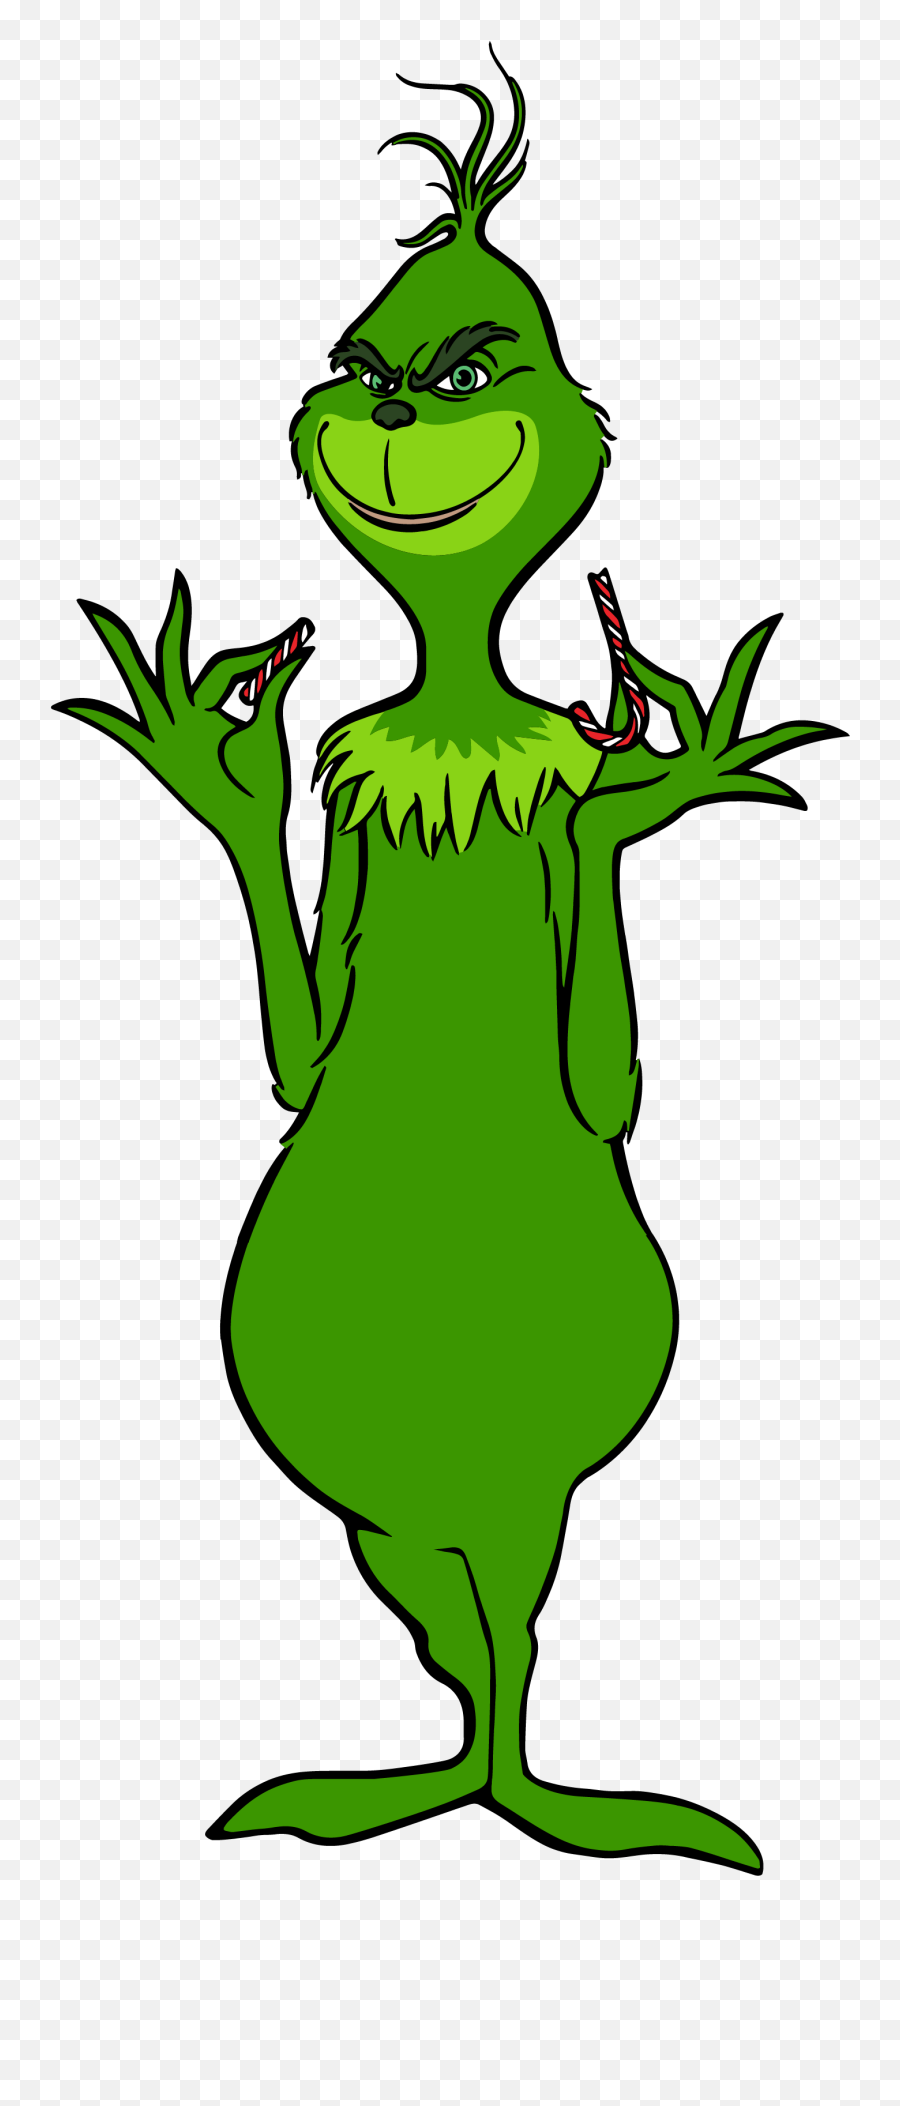 Pin On The Grinch Svg - Animated Cartoon Emoji,Grinch Clipart